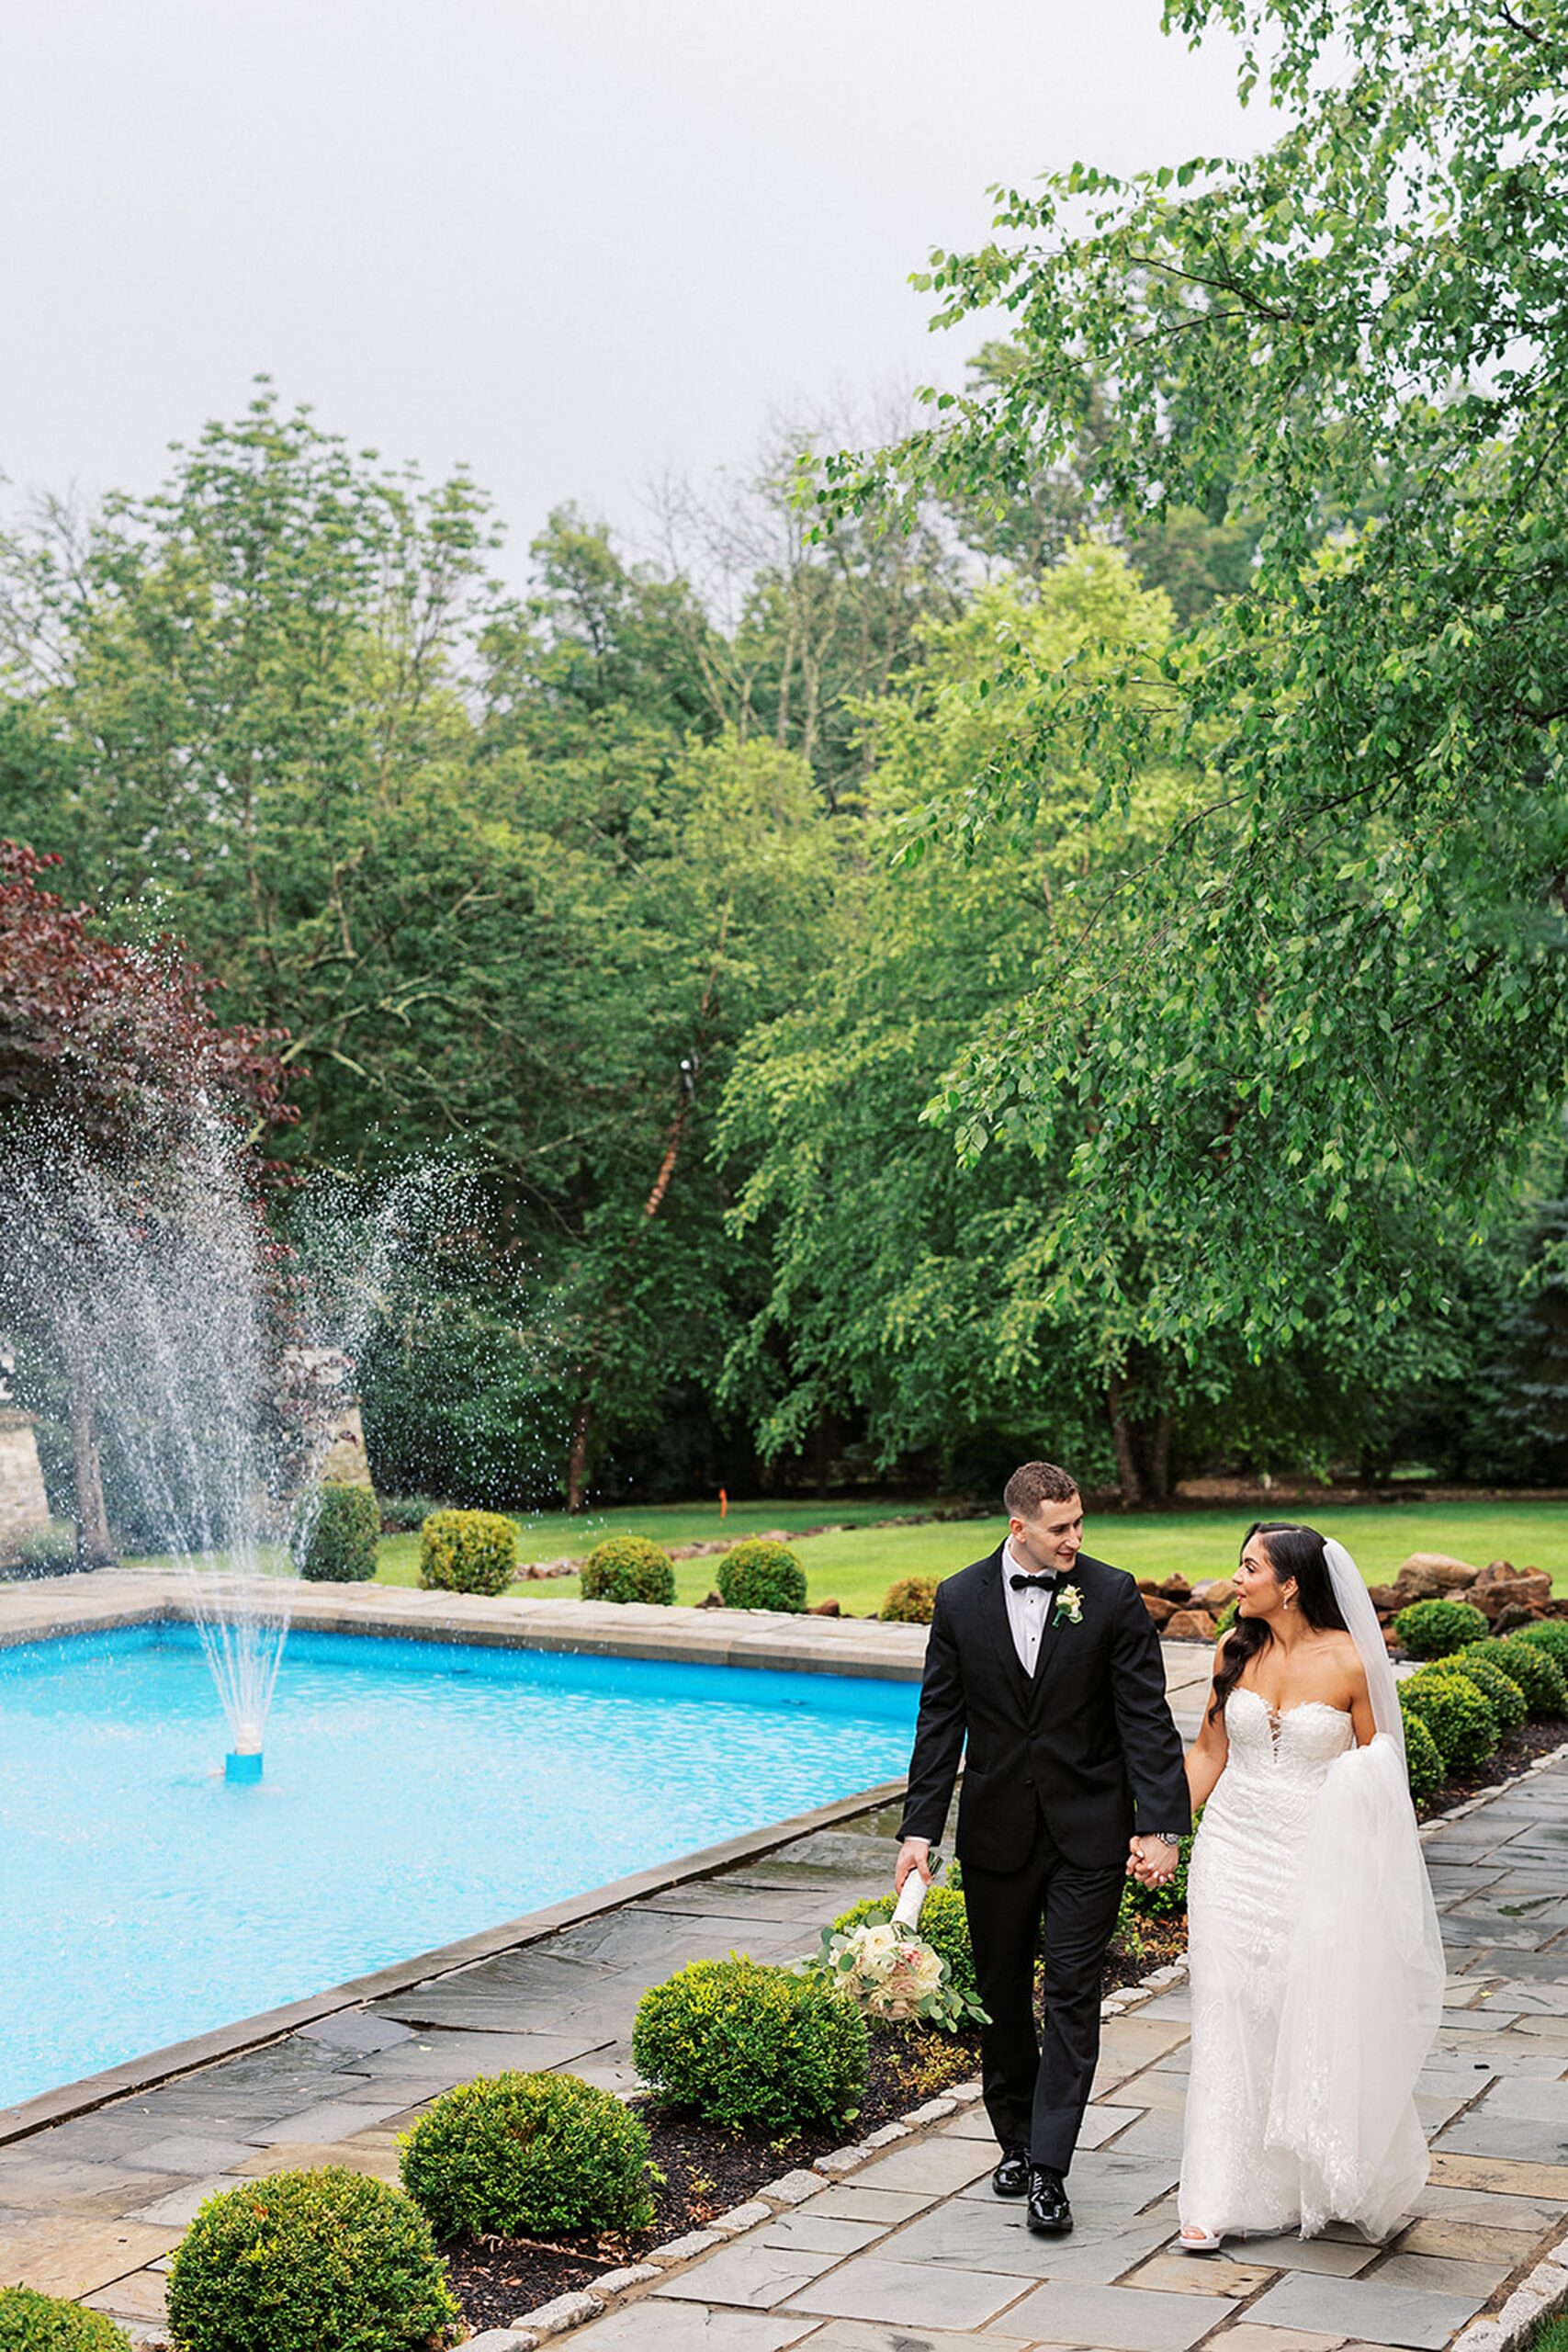 Newlyweds walk past a garden fountain on a stone walkway while holding hands